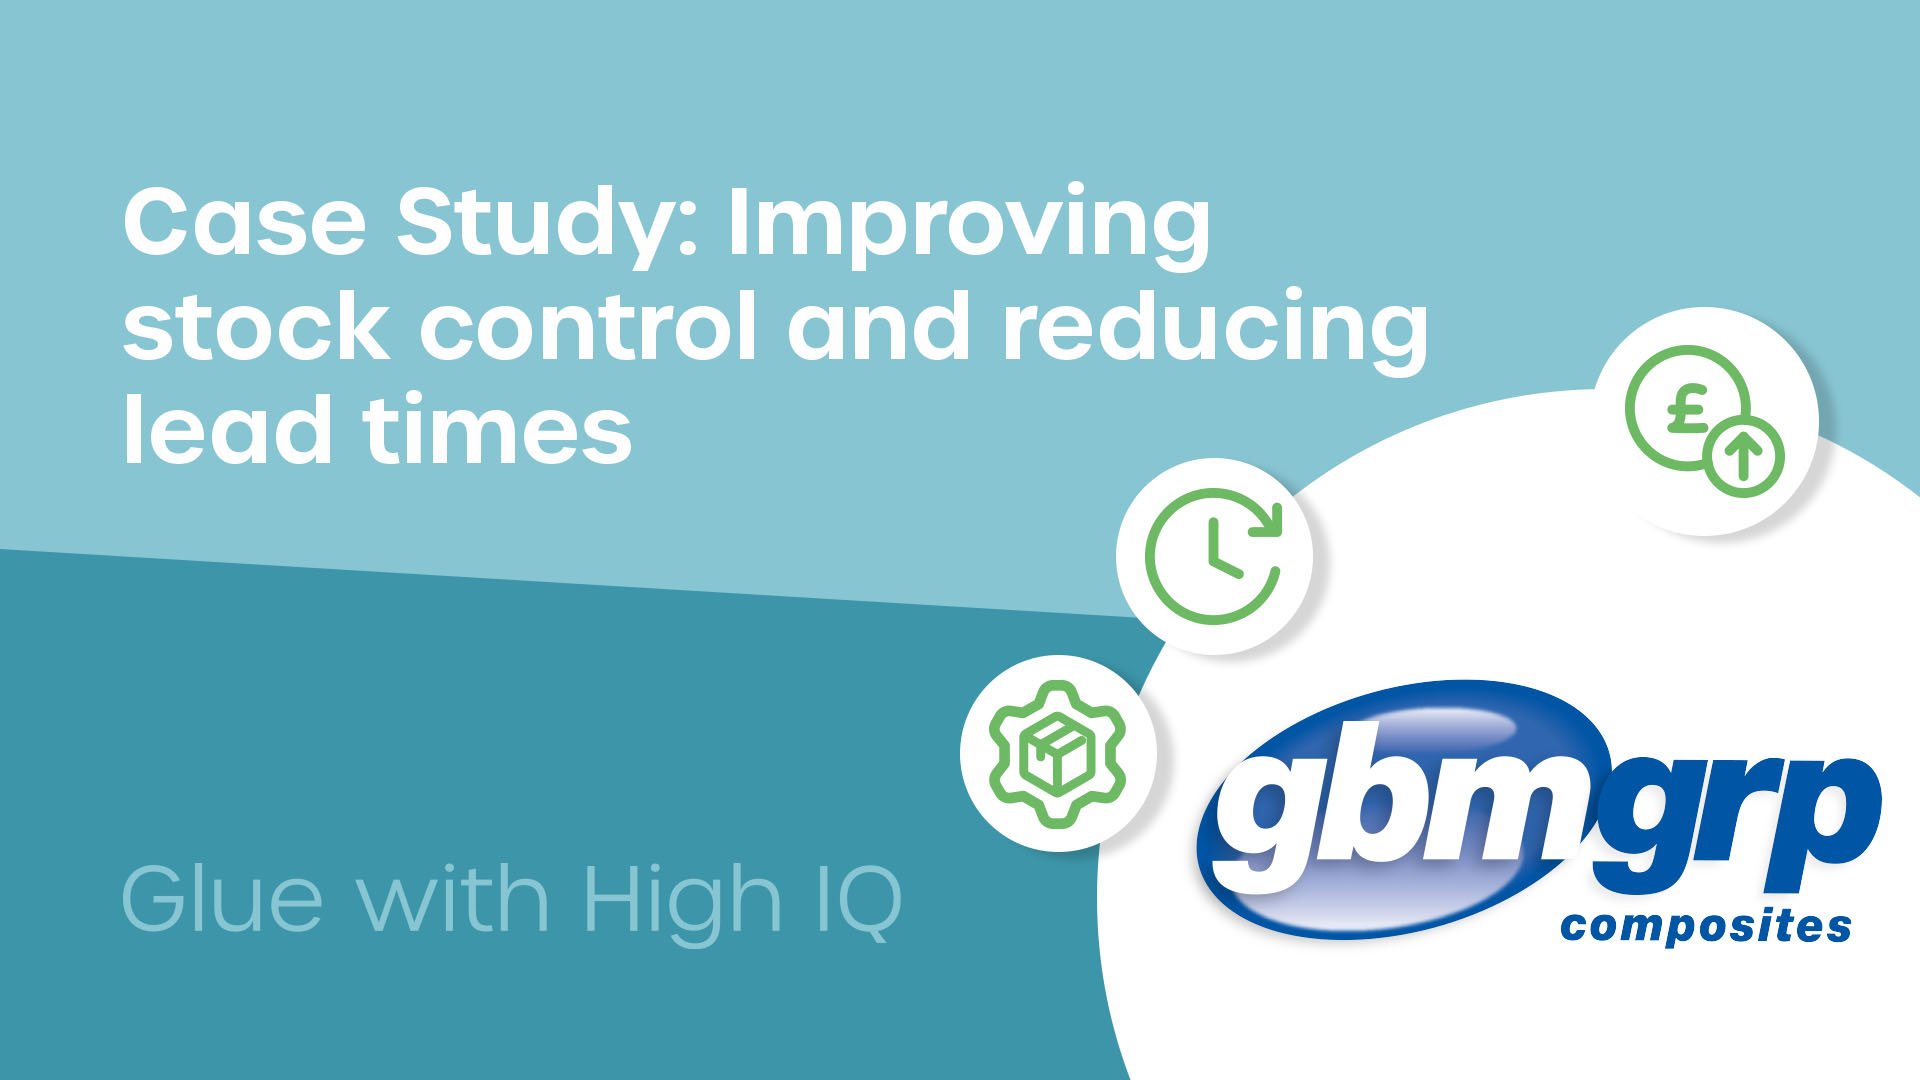 How forgeway helped GBM Ltd resolve adhesive supply issues